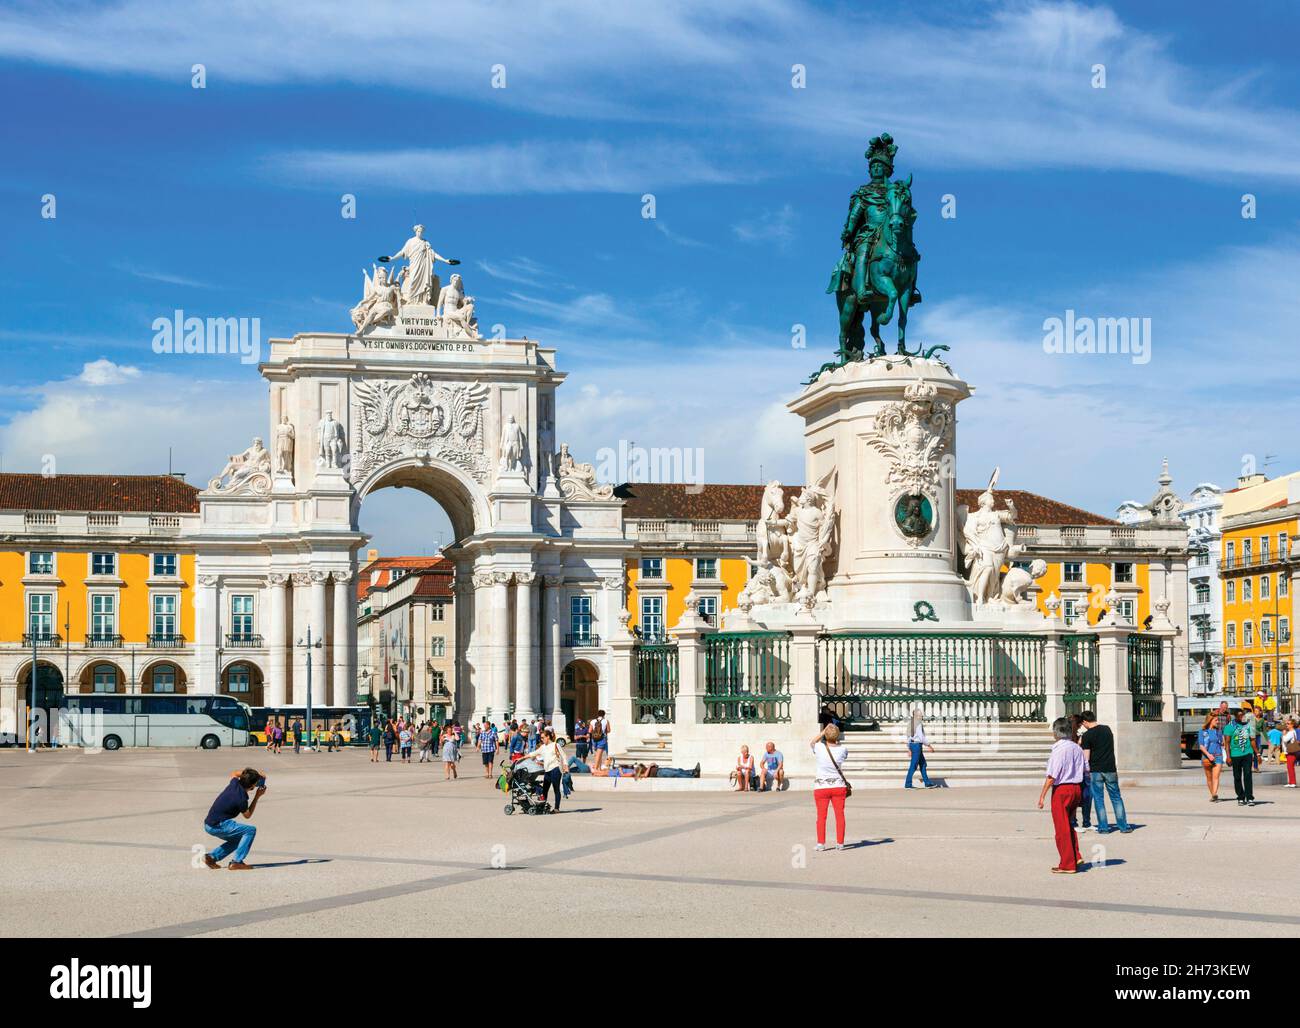 Lisbon, Portugal.  Praca do Comercio, or Commerce Square.  It is also known as Terreiro do Paco, or Palace Square after the Royal Palace which stood t Stock Photo